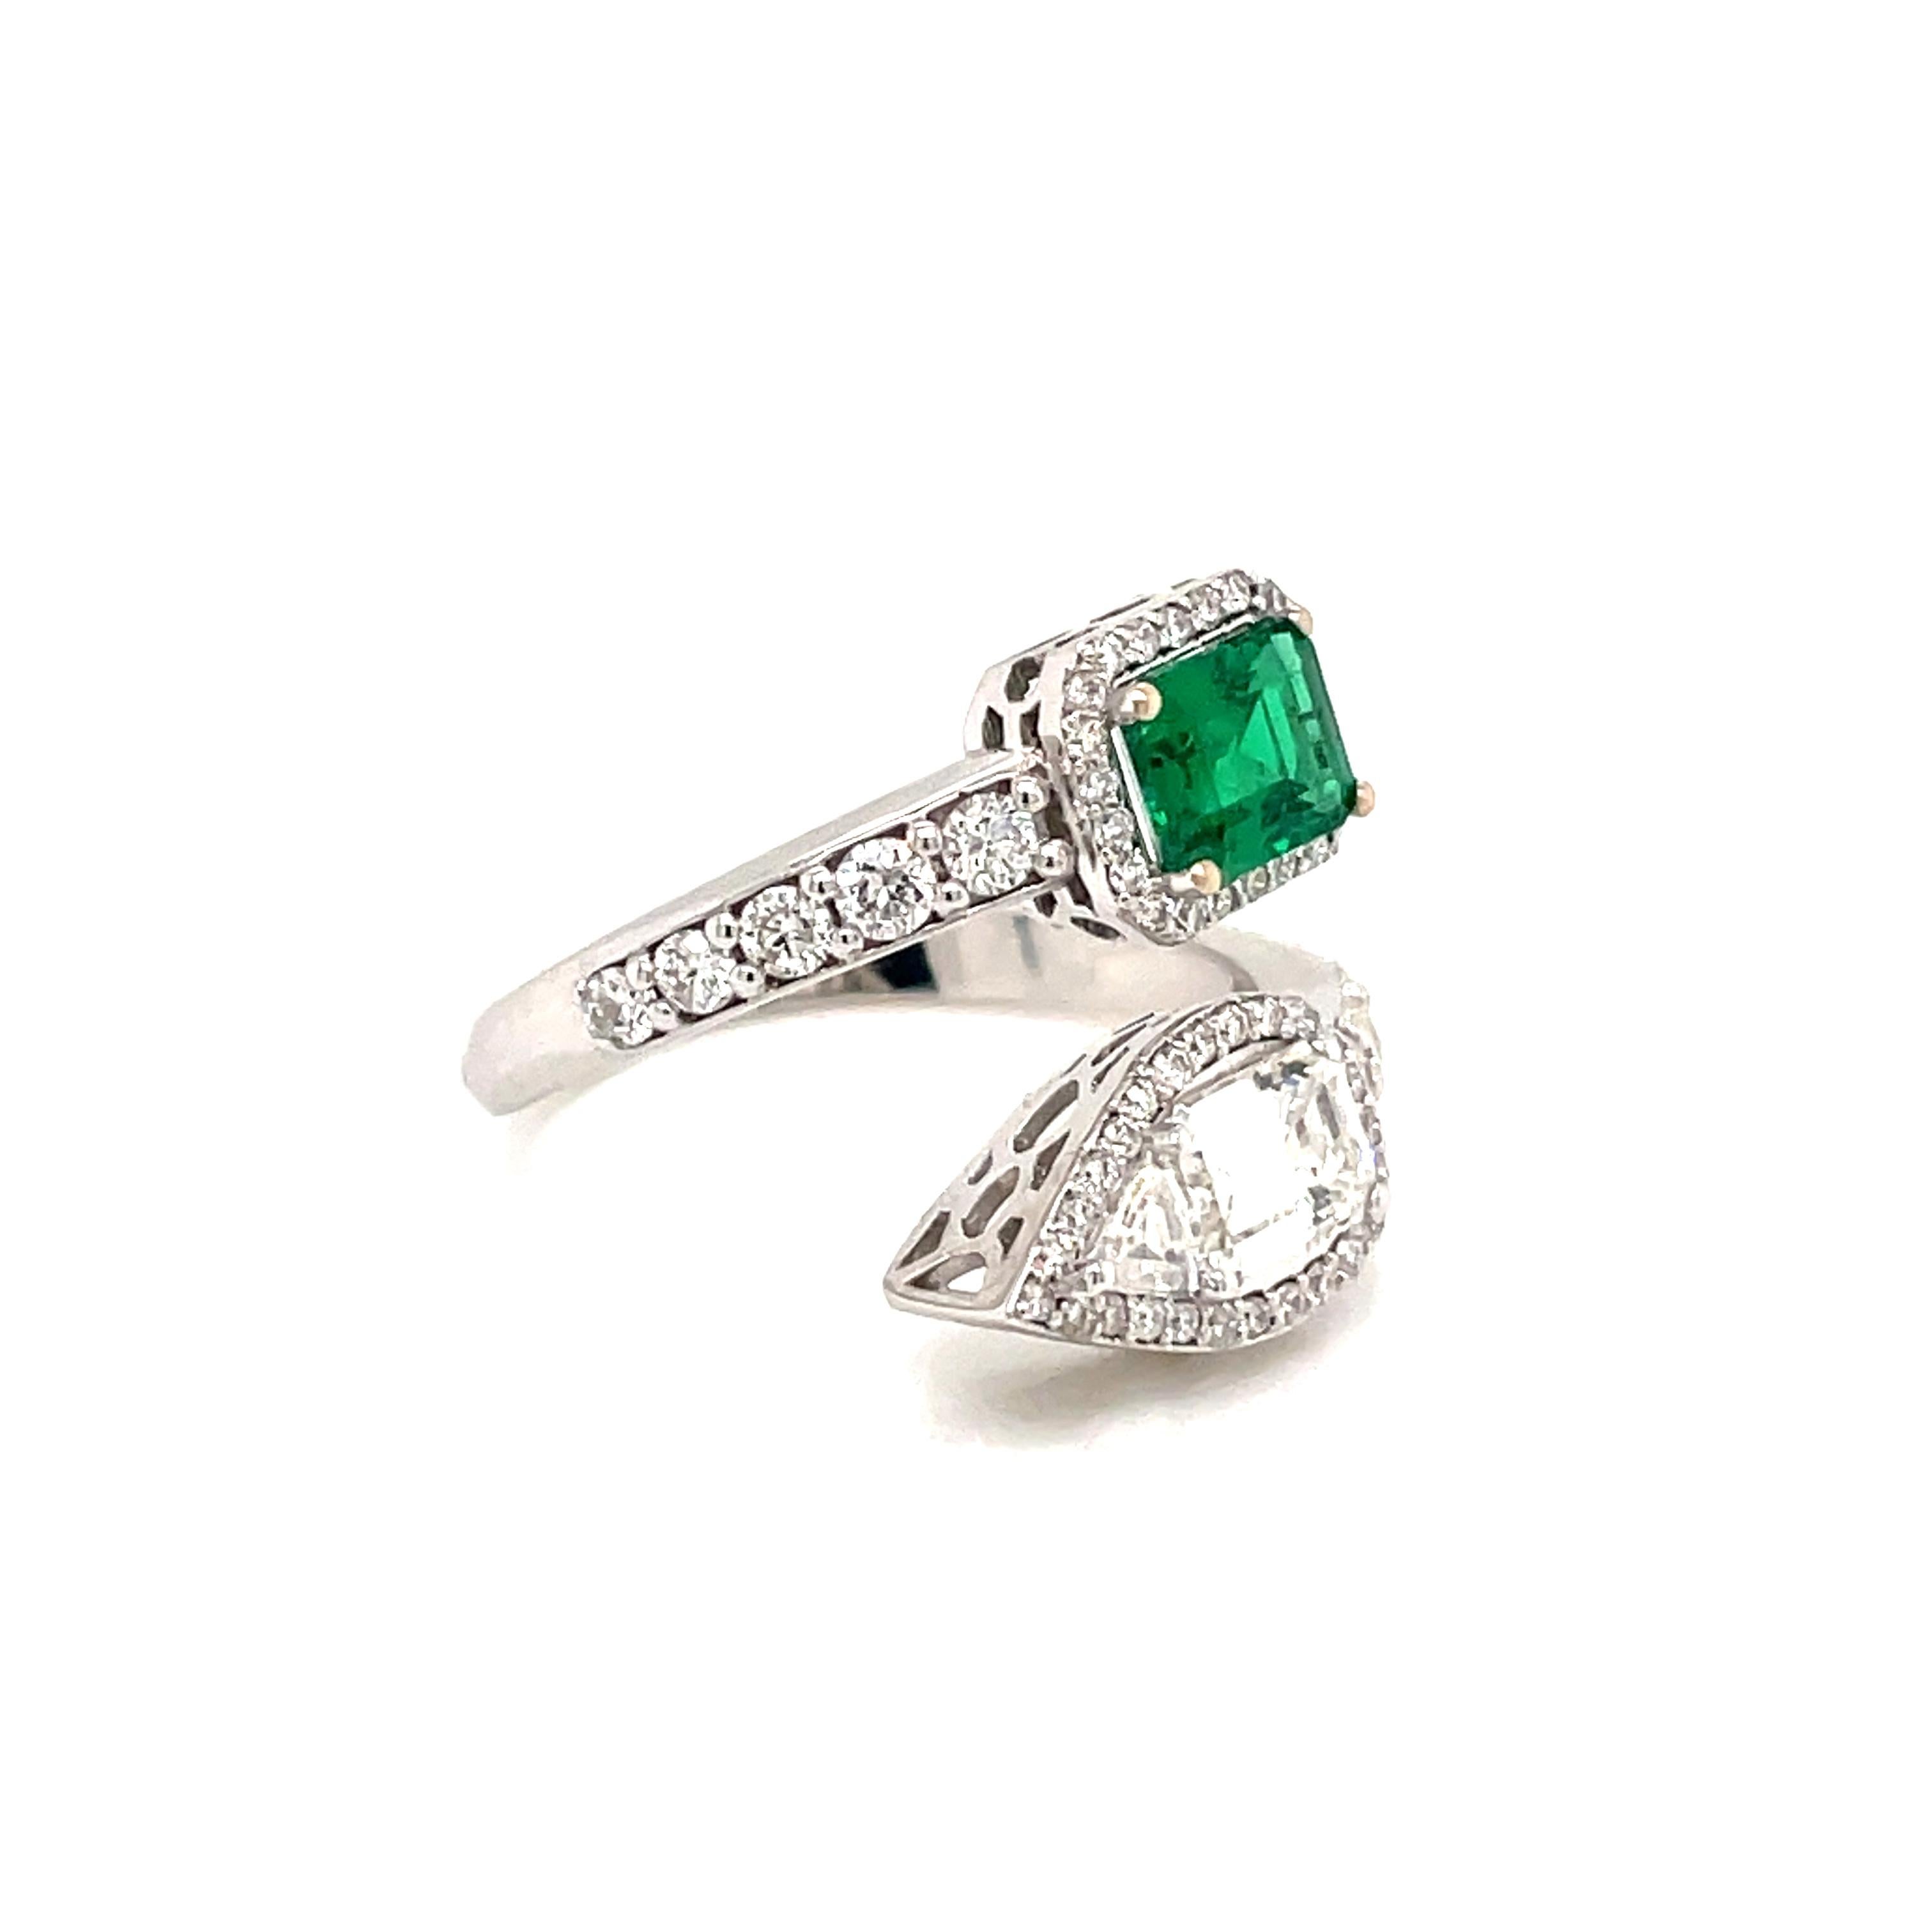 Beautiful Italian Emerald Diamond Estate Ring
An 18K white gold bypass ring, set with one vivid Natural Certified Colombian Emerald, approx. 1 ct, and a large sparkling Emerald cut diamond and a smaller trillion cut diamond. Weights are 0.70 cts for